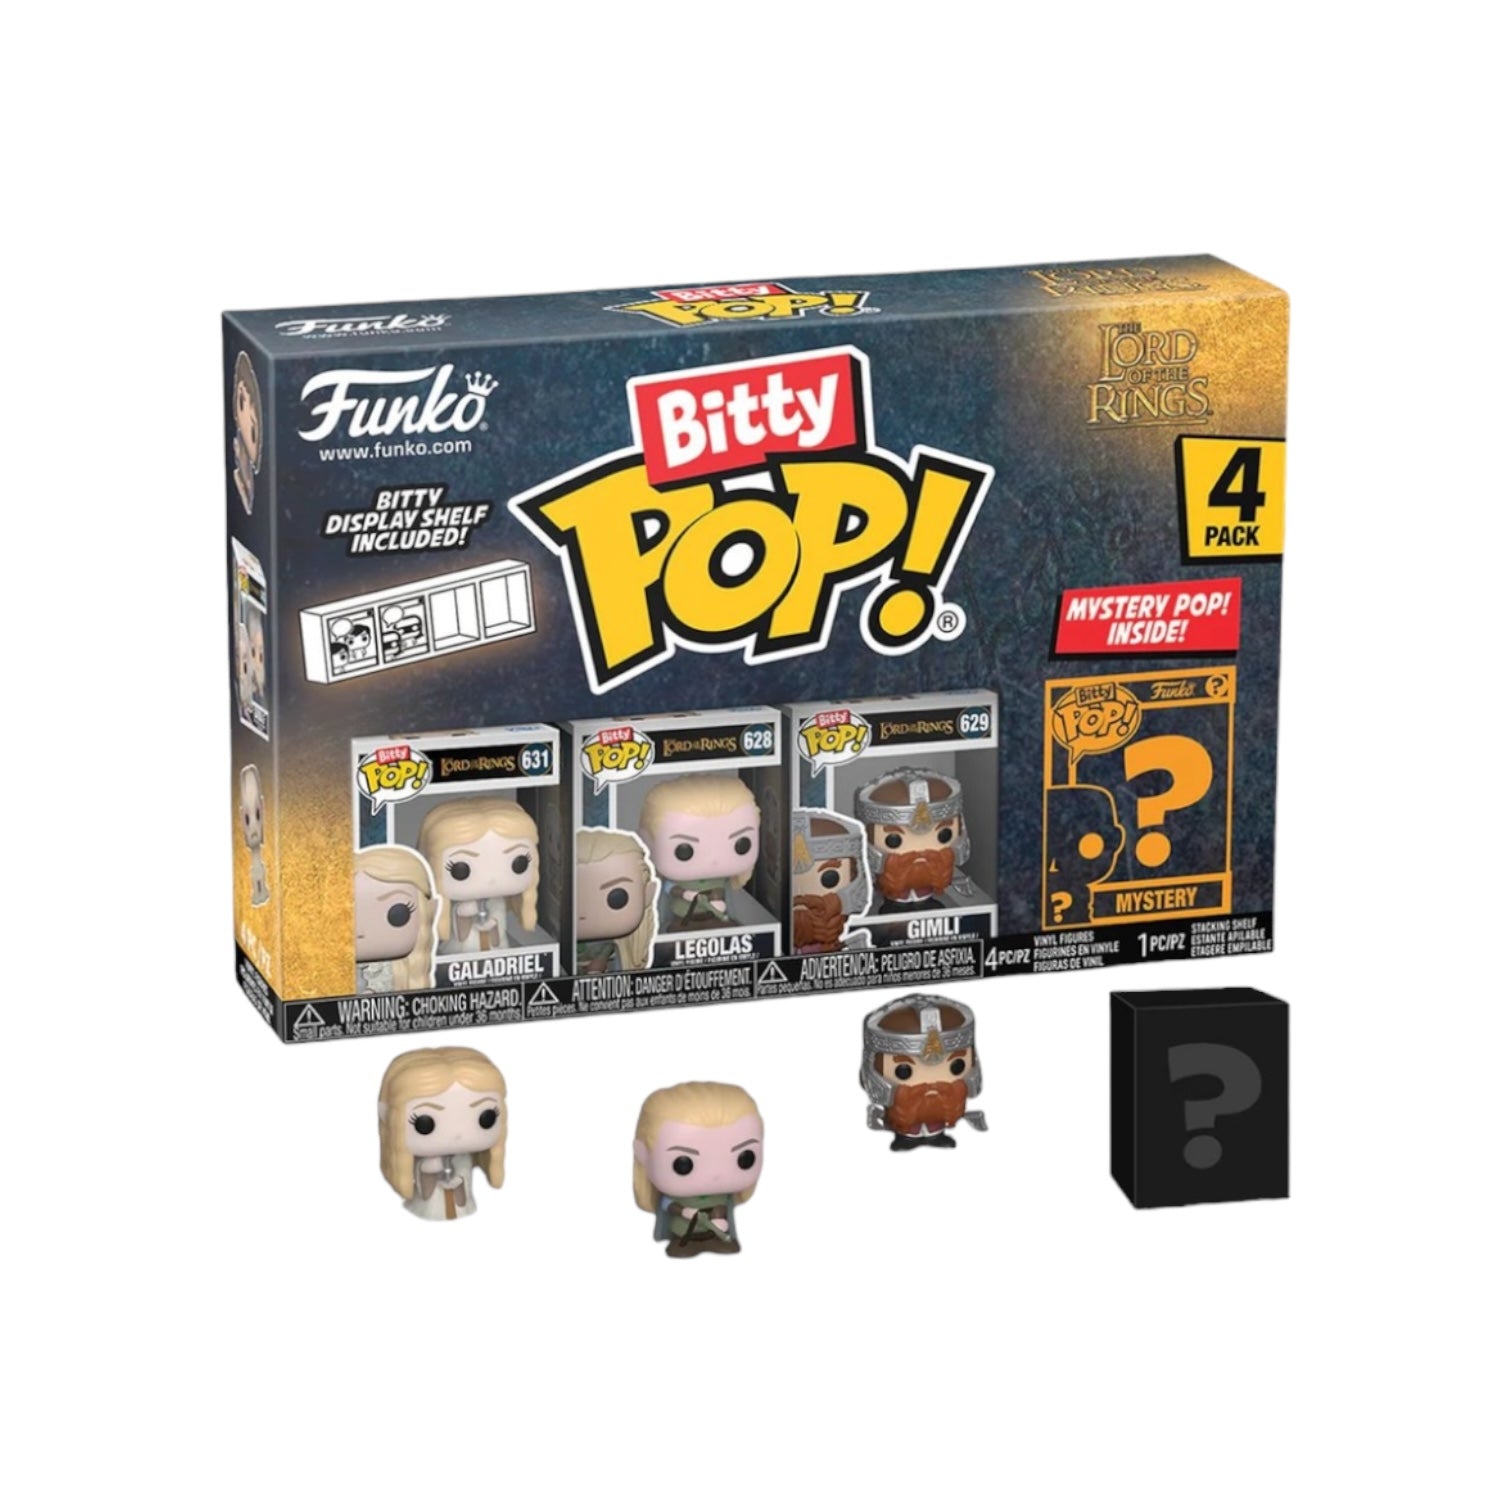 Galadriel 4 Pack Bitty Funko Pop! - Lord of the Rings - Chance Of Chase - PREORDER